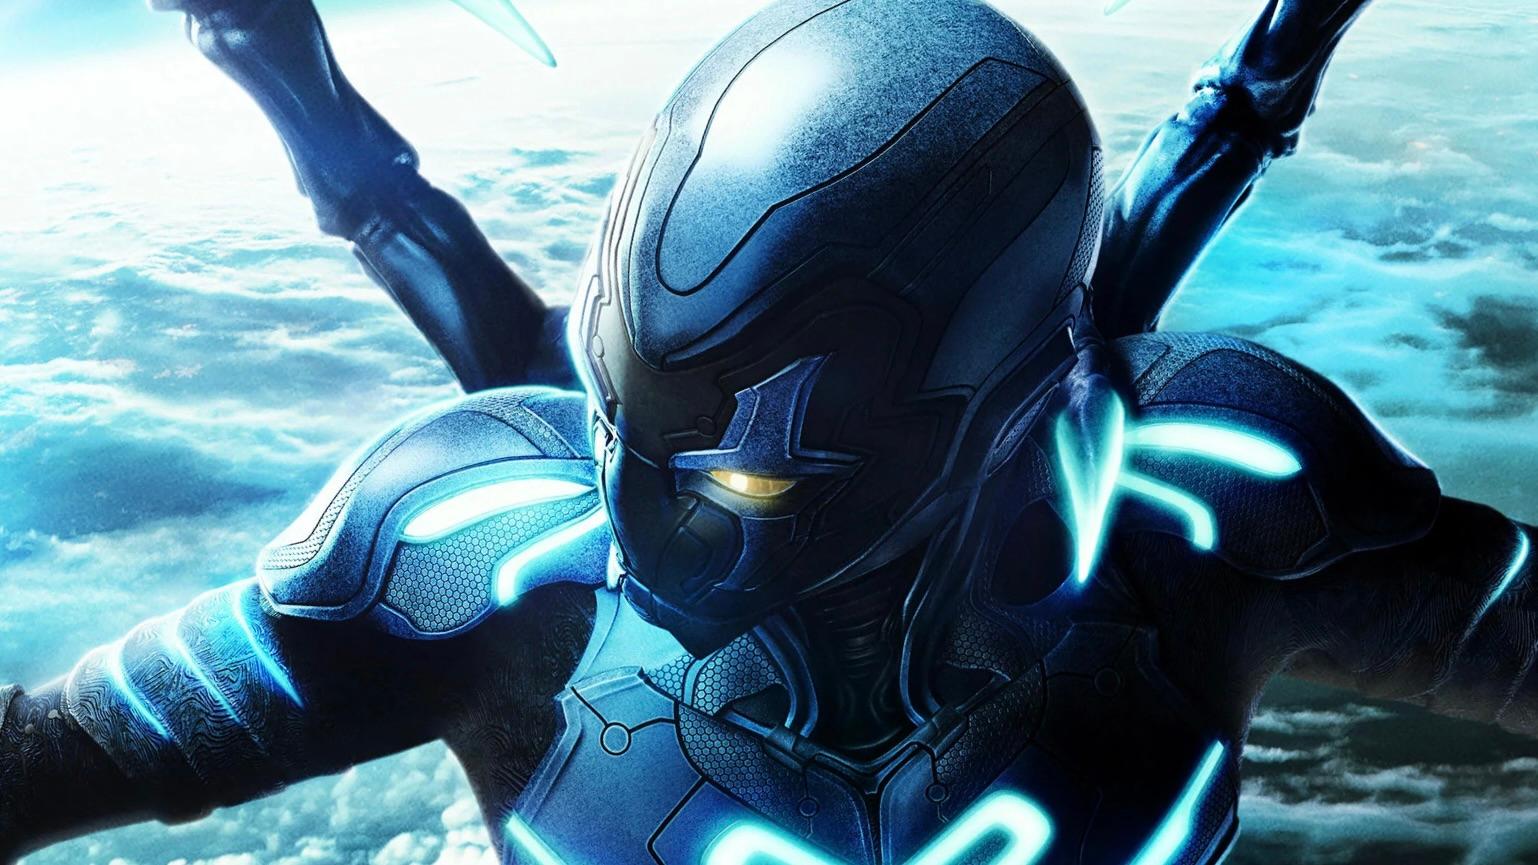 An image from the Blue Beetle movie.